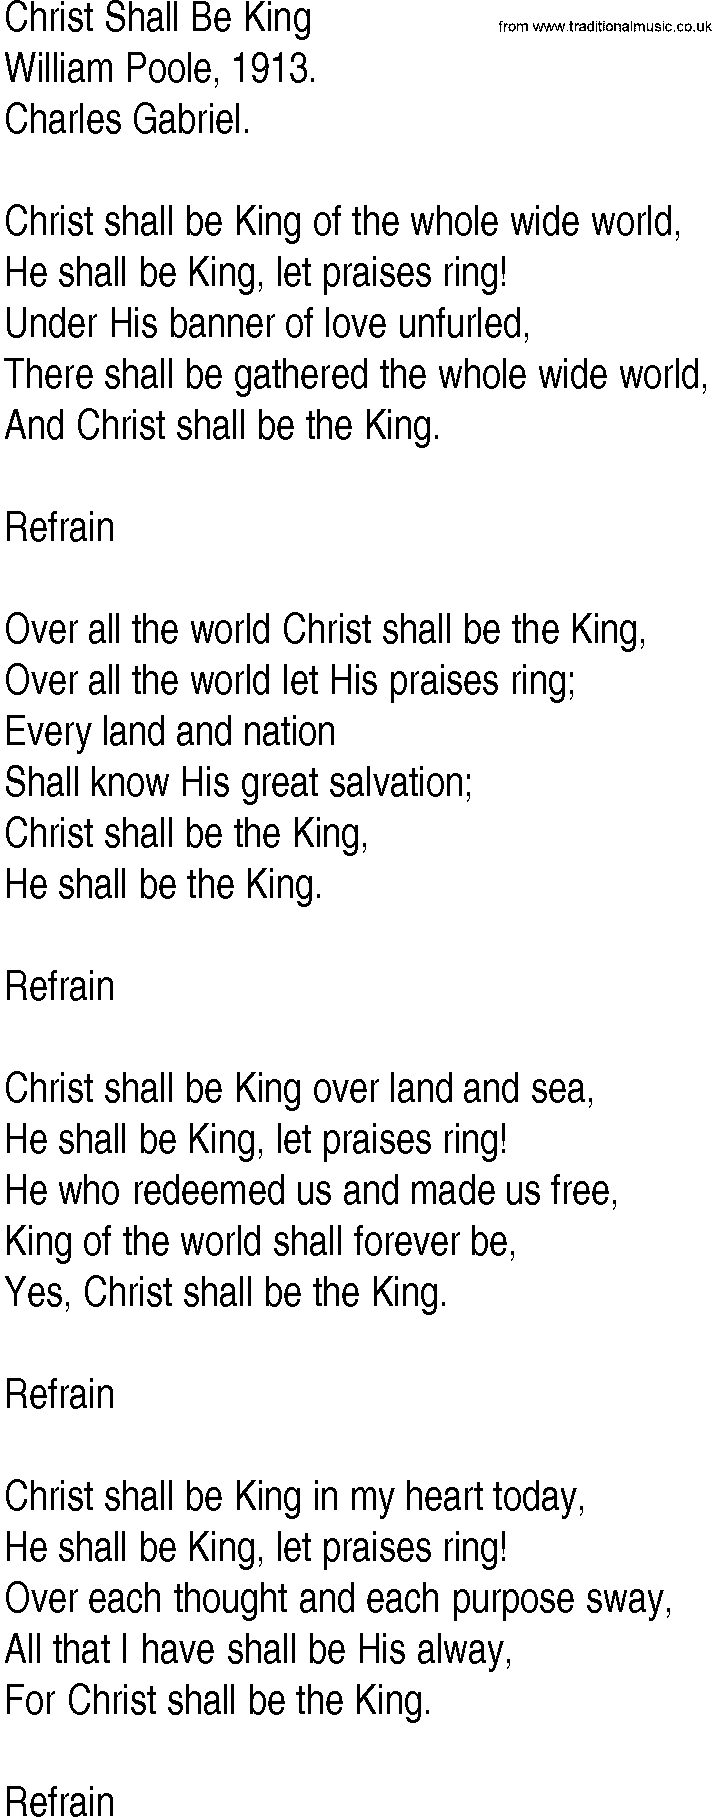 Hymn and Gospel Song: Christ Shall Be King by William Poole lyrics